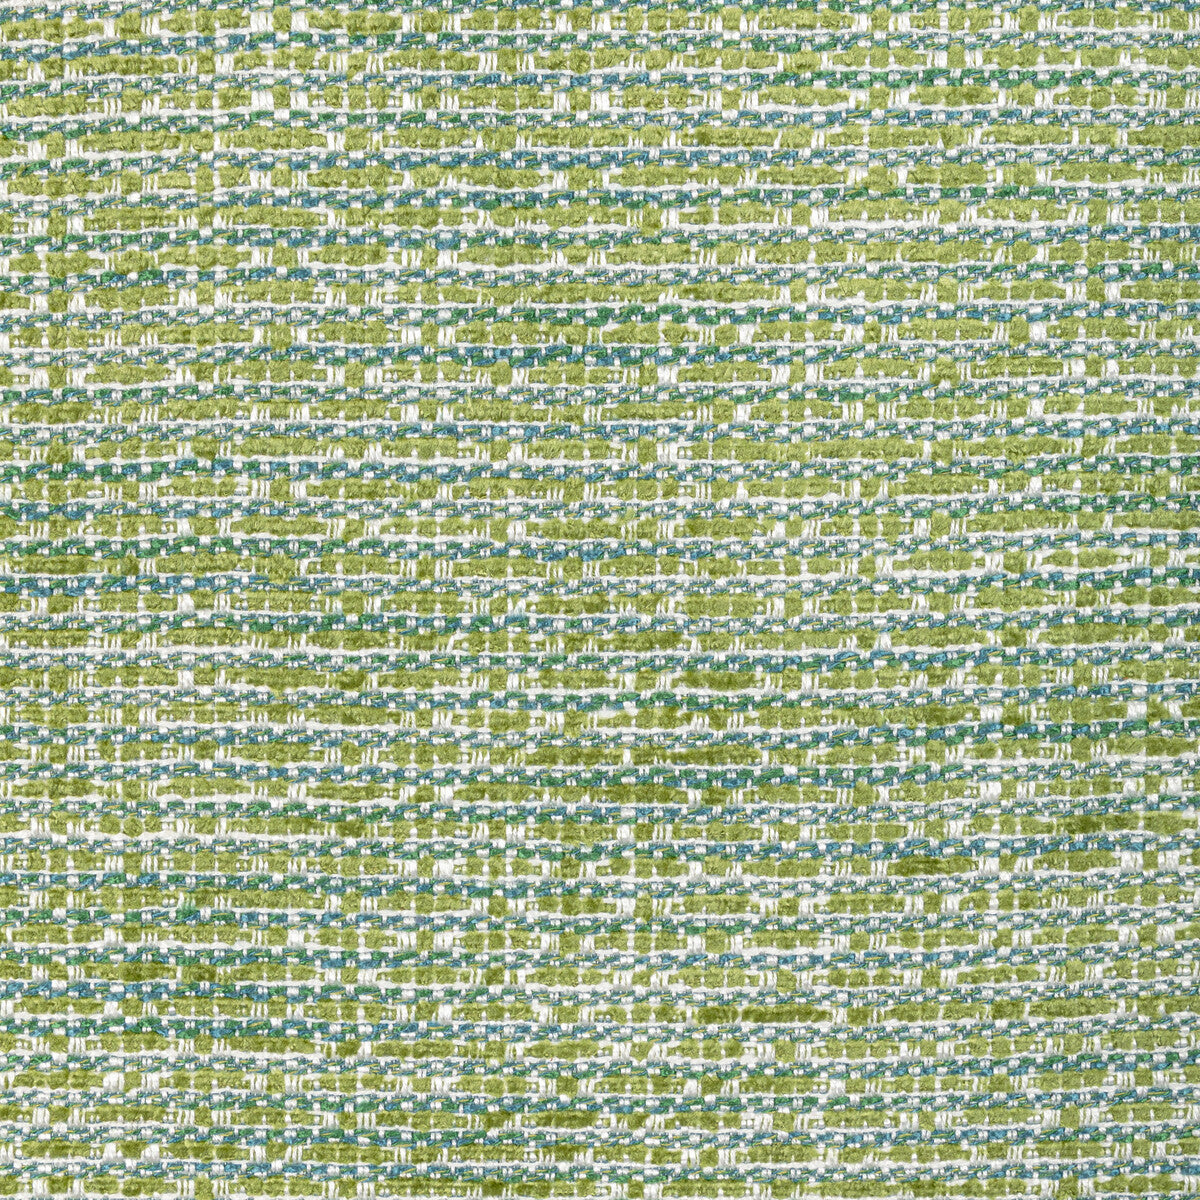 Kravet Design fabric in 36409-353 color - pattern 36409.353.0 - by Kravet Design in the Performance Crypton Home collection